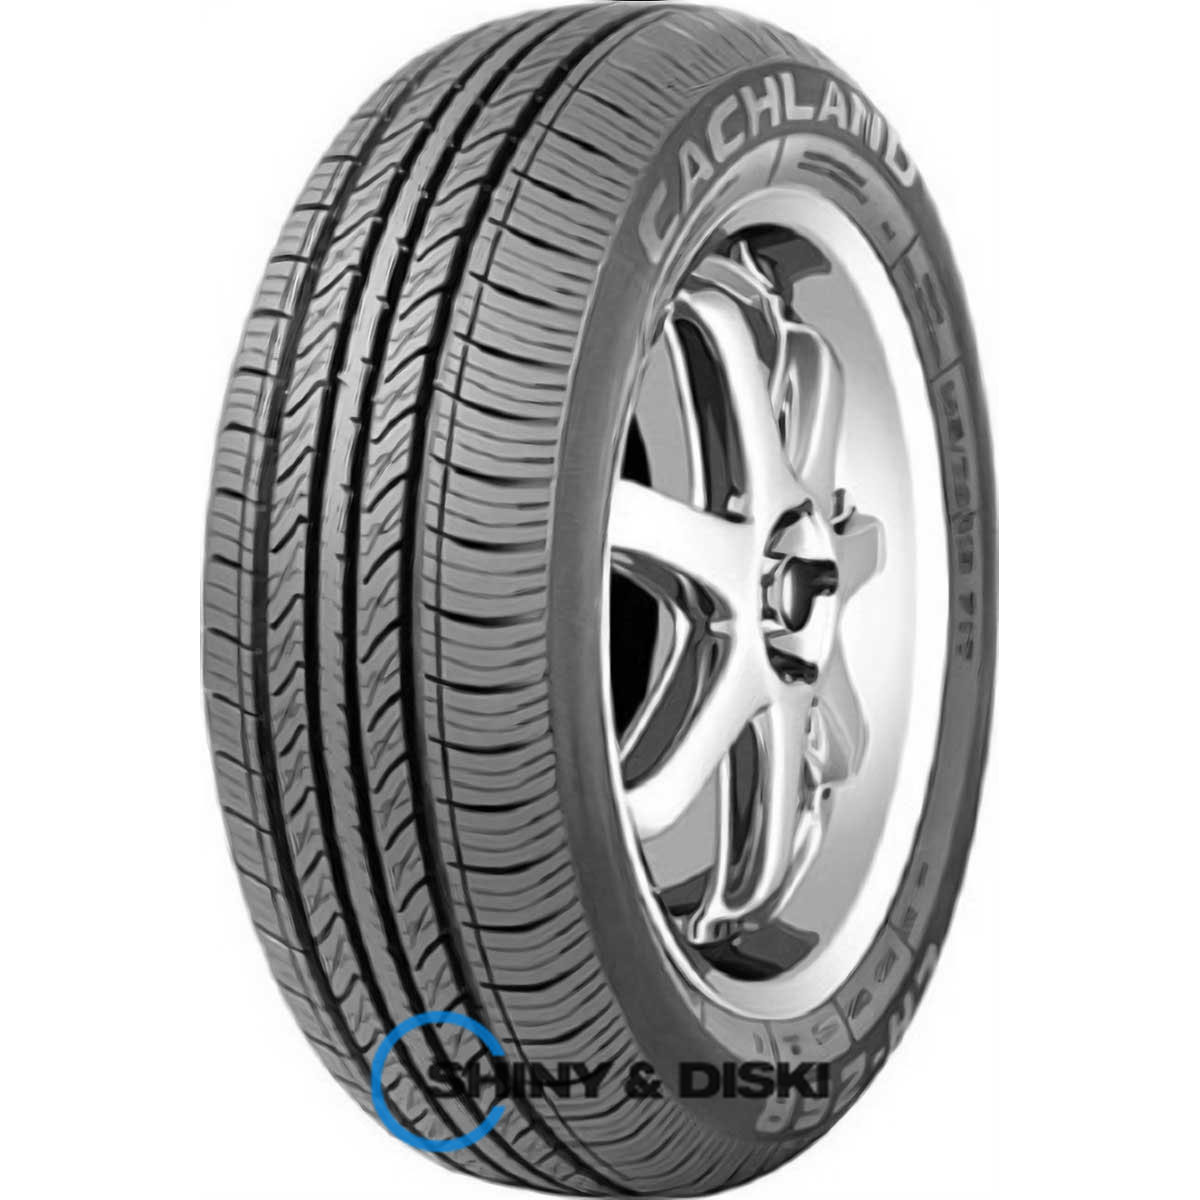 cachland ch-268 175/70 r14 84t